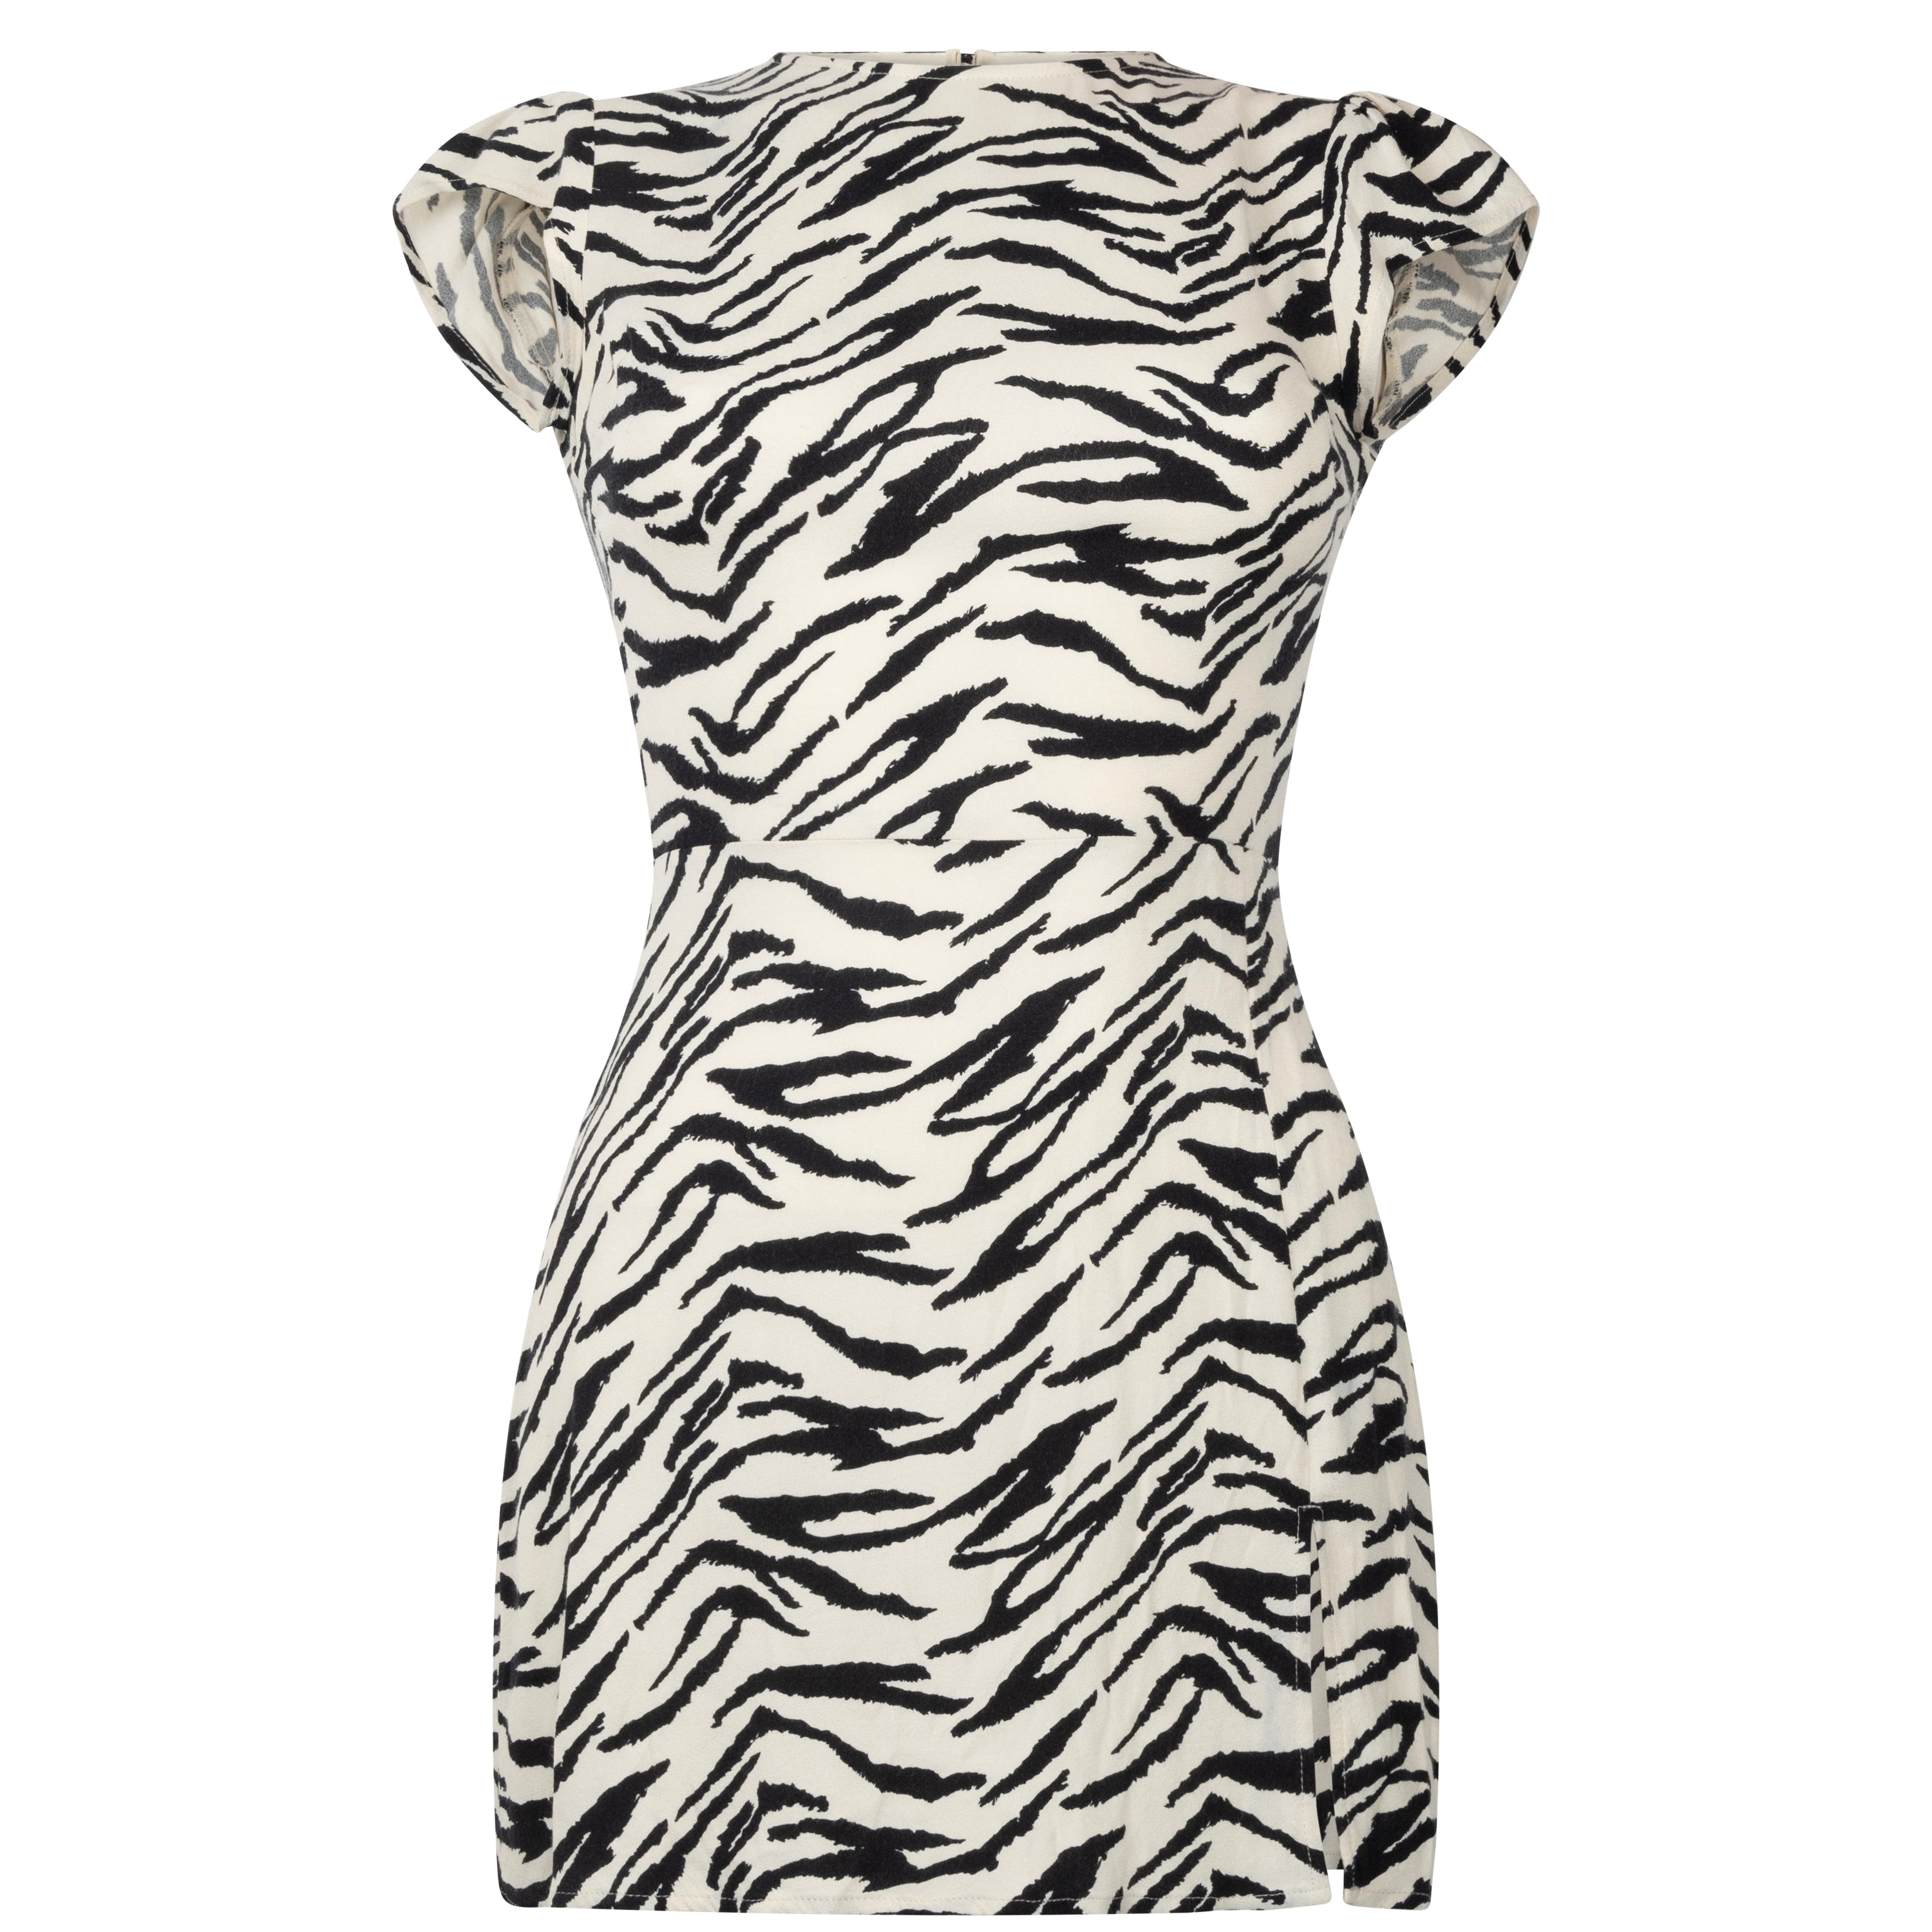 Rent for your upcoming holiday! Reformation zebra dress with open back. It girl